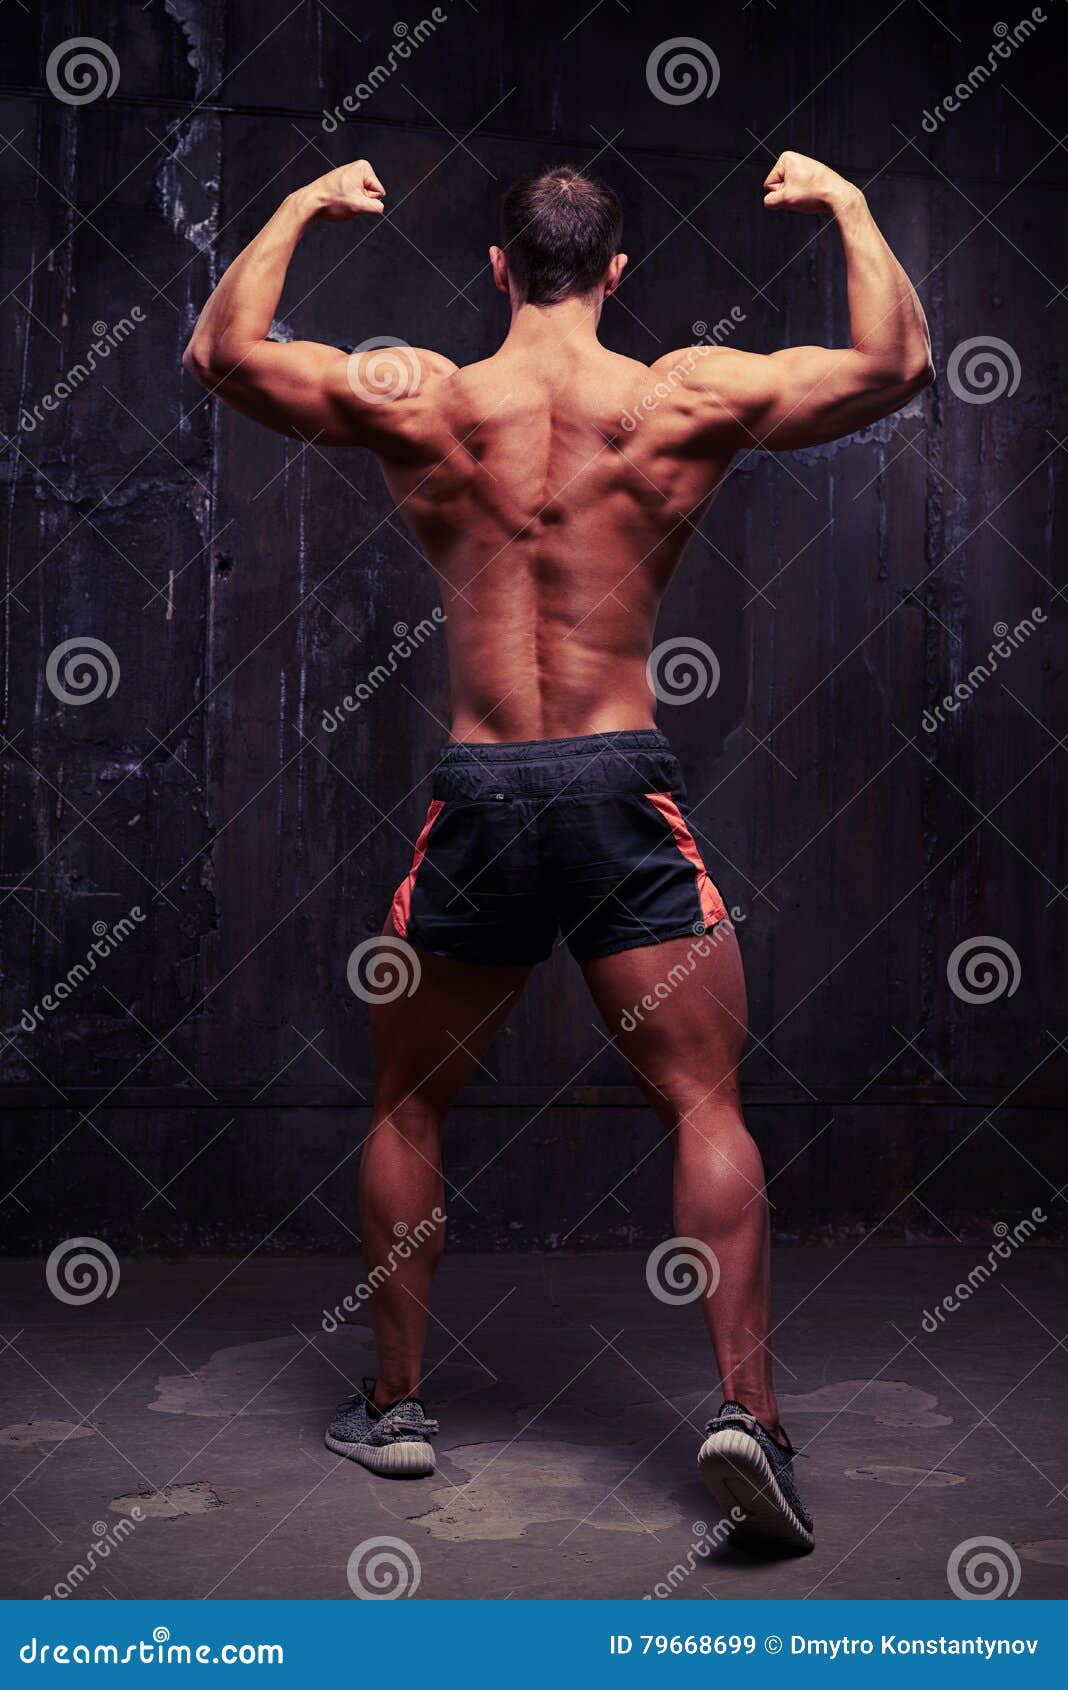 Muscular Man Images, HD Pictures For Free Vectors Download - Lovepik.com